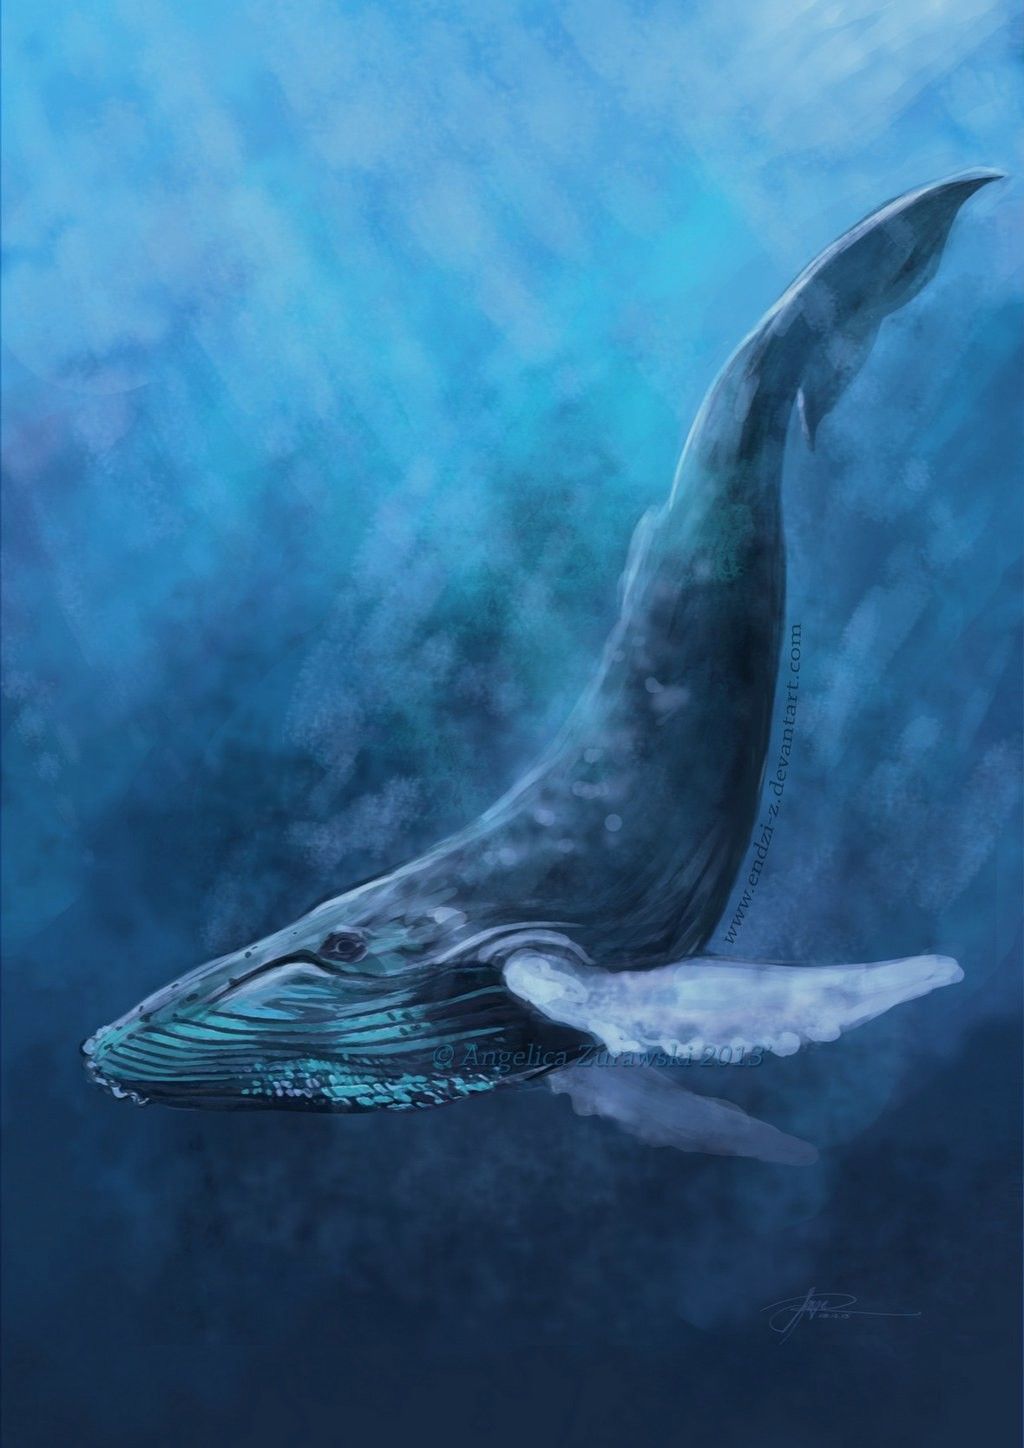 Whale iPhone Wallpaper Free .wallpaperaccess.com